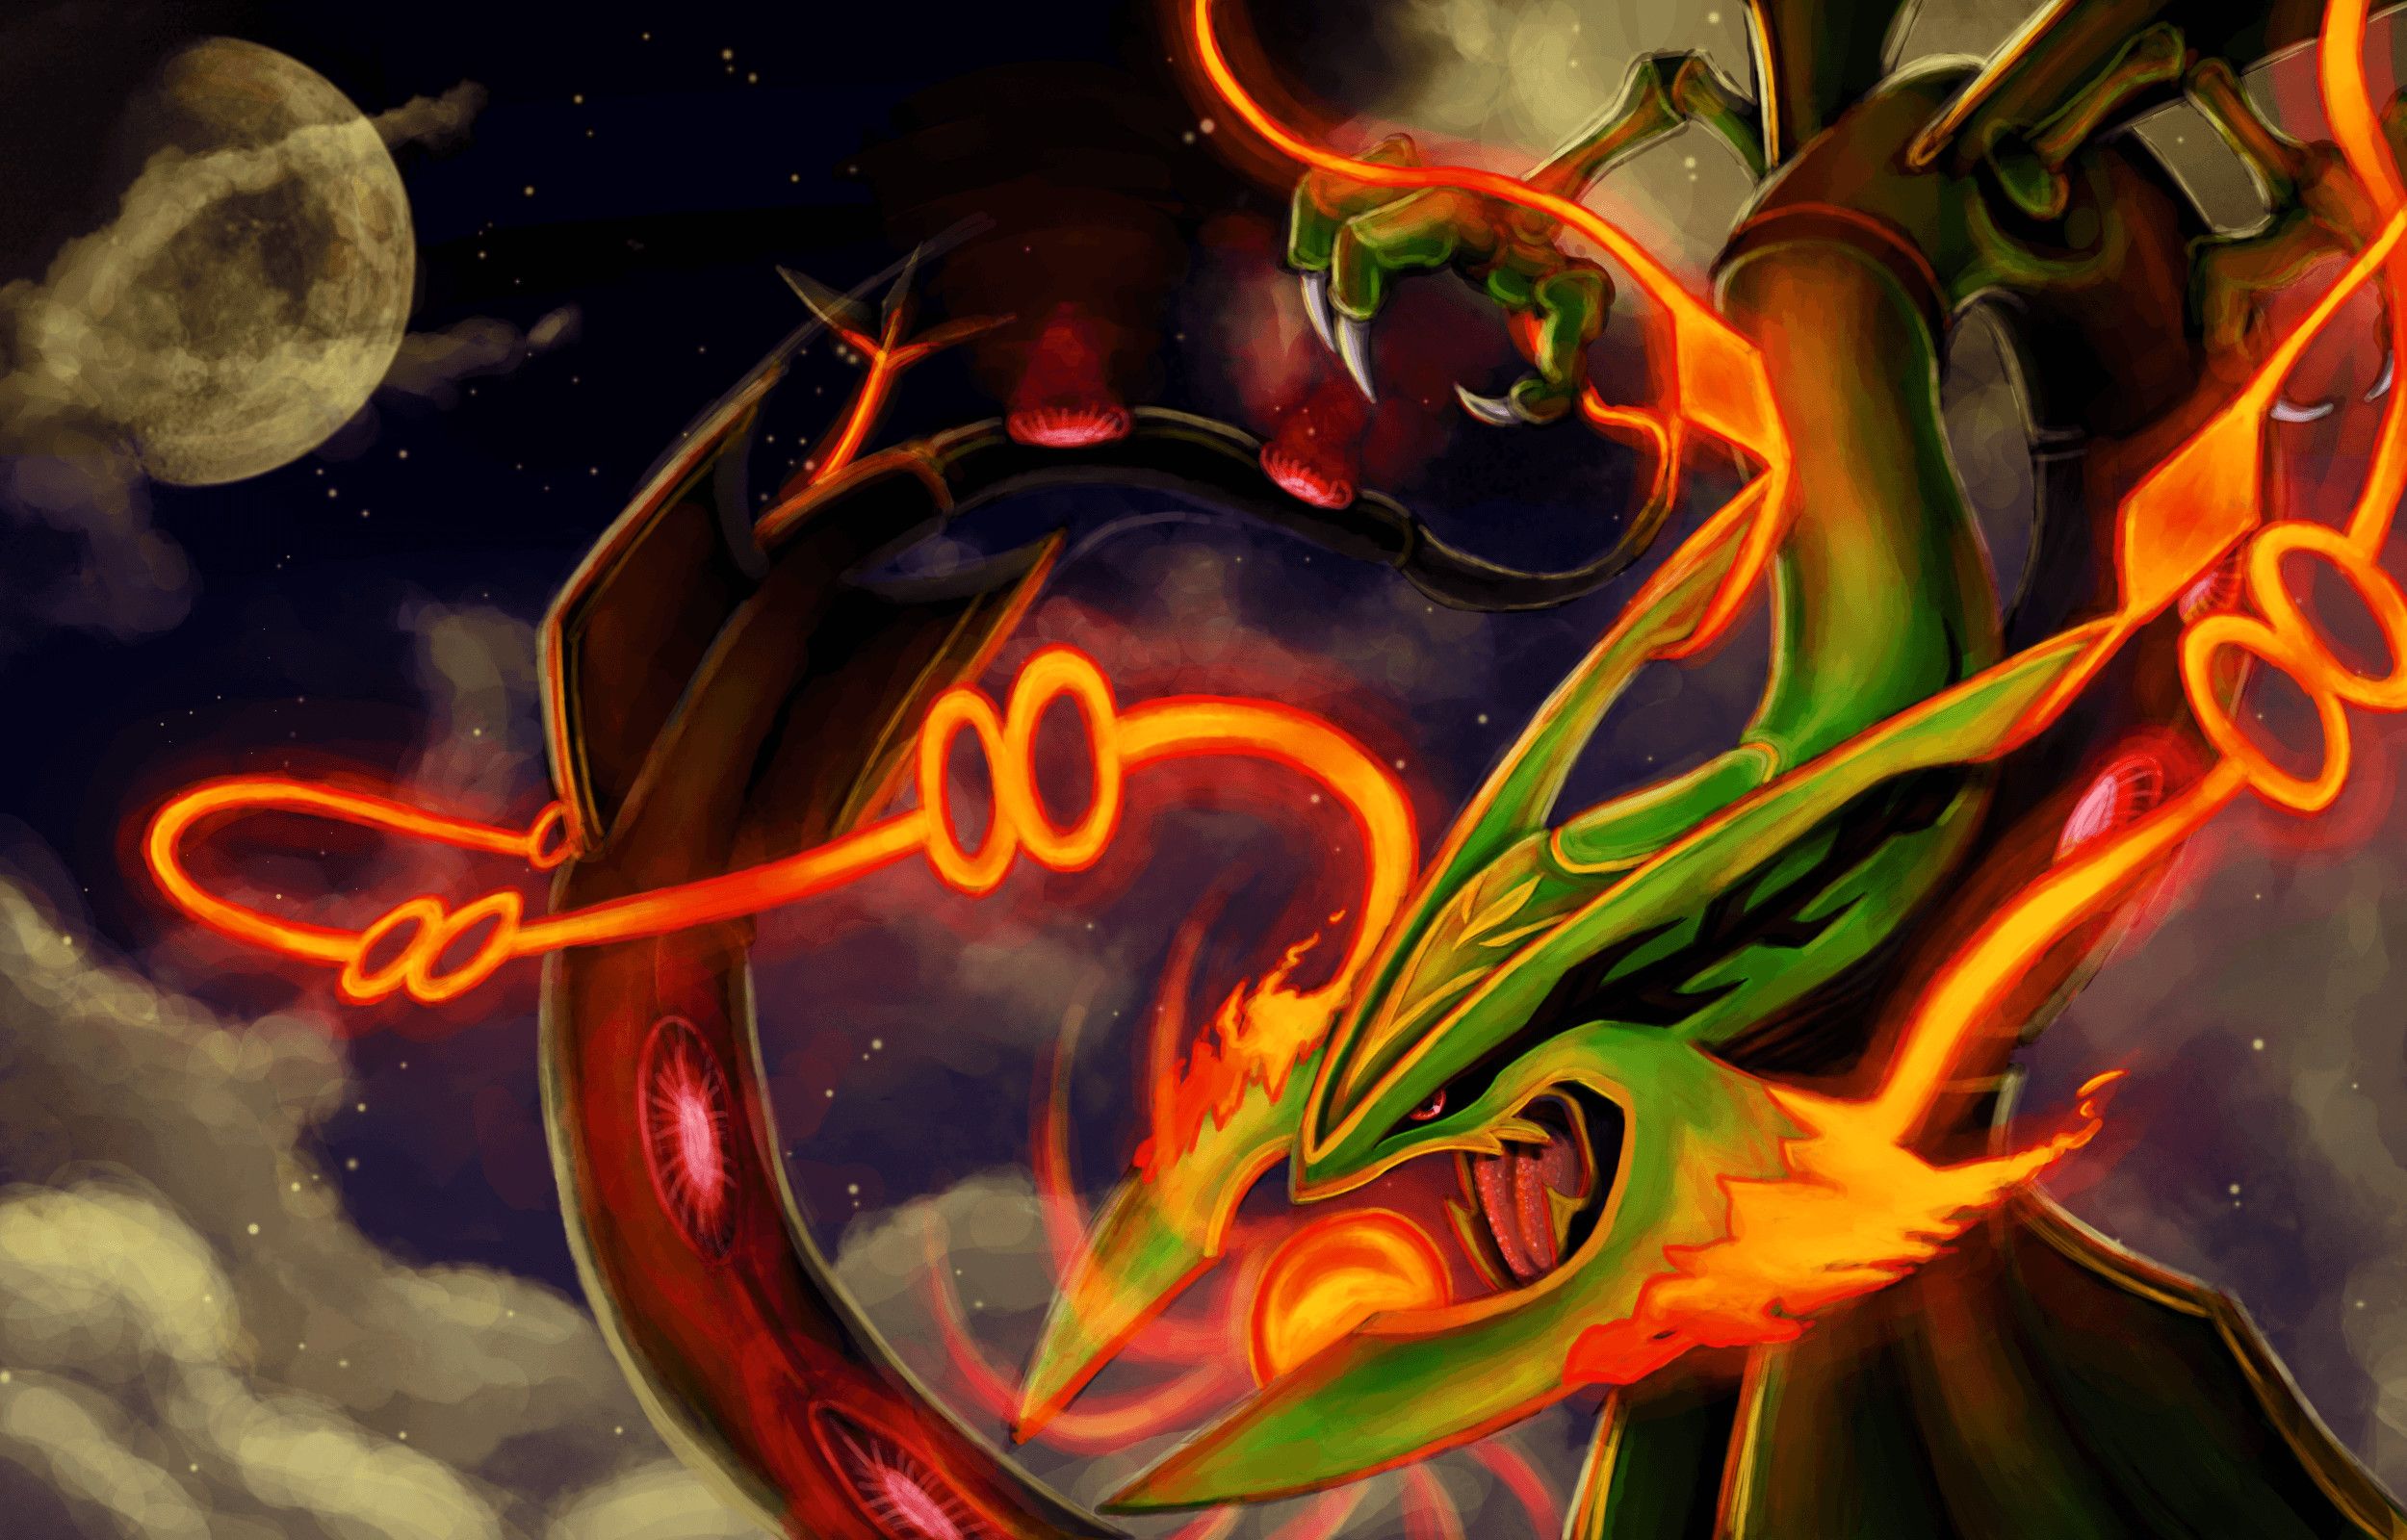 Shiny rayquaza wallpaper by jesalpha - Download on ZEDGE™